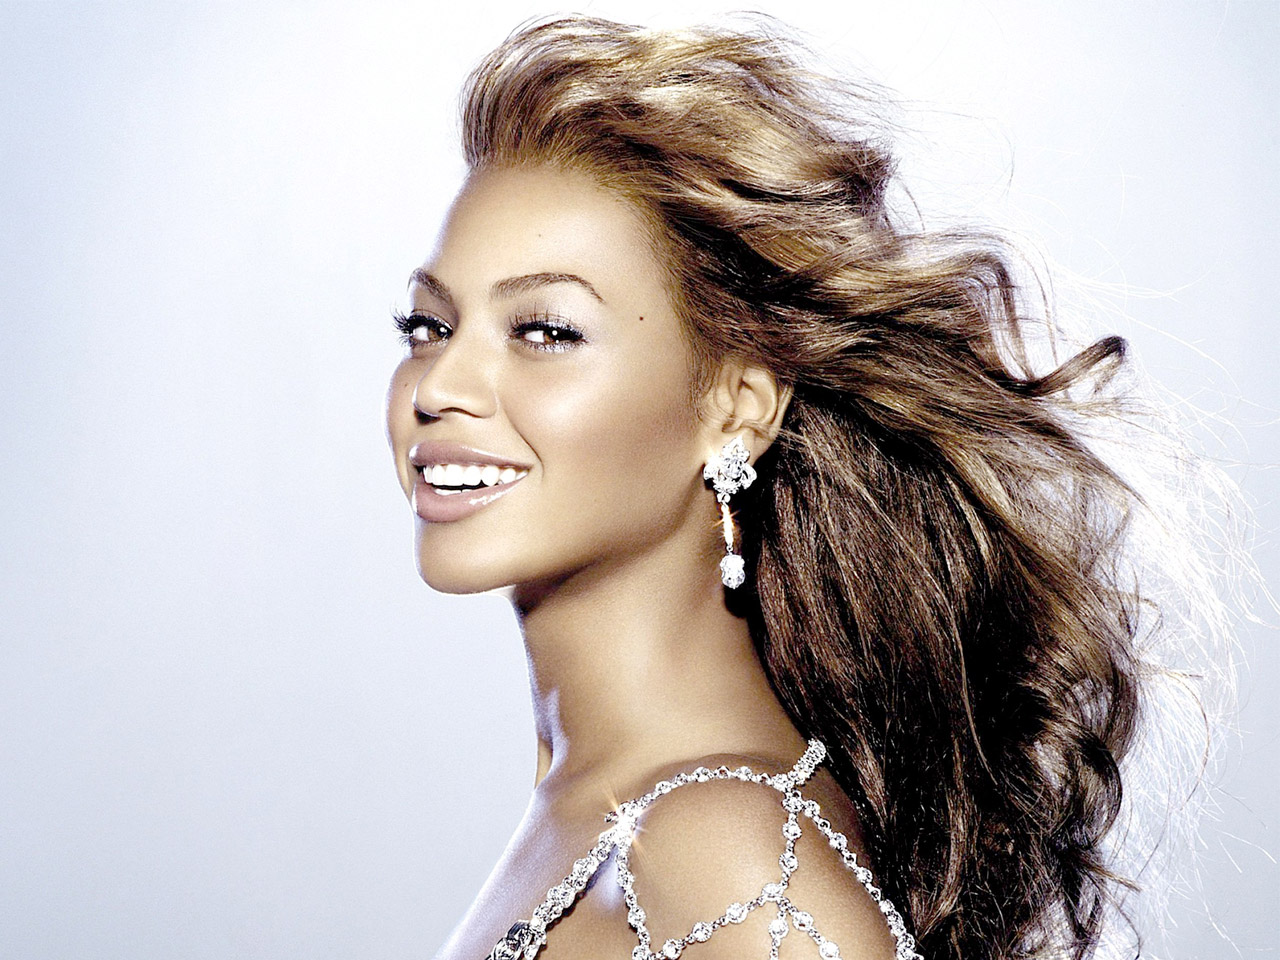 beyonce discography torrent download